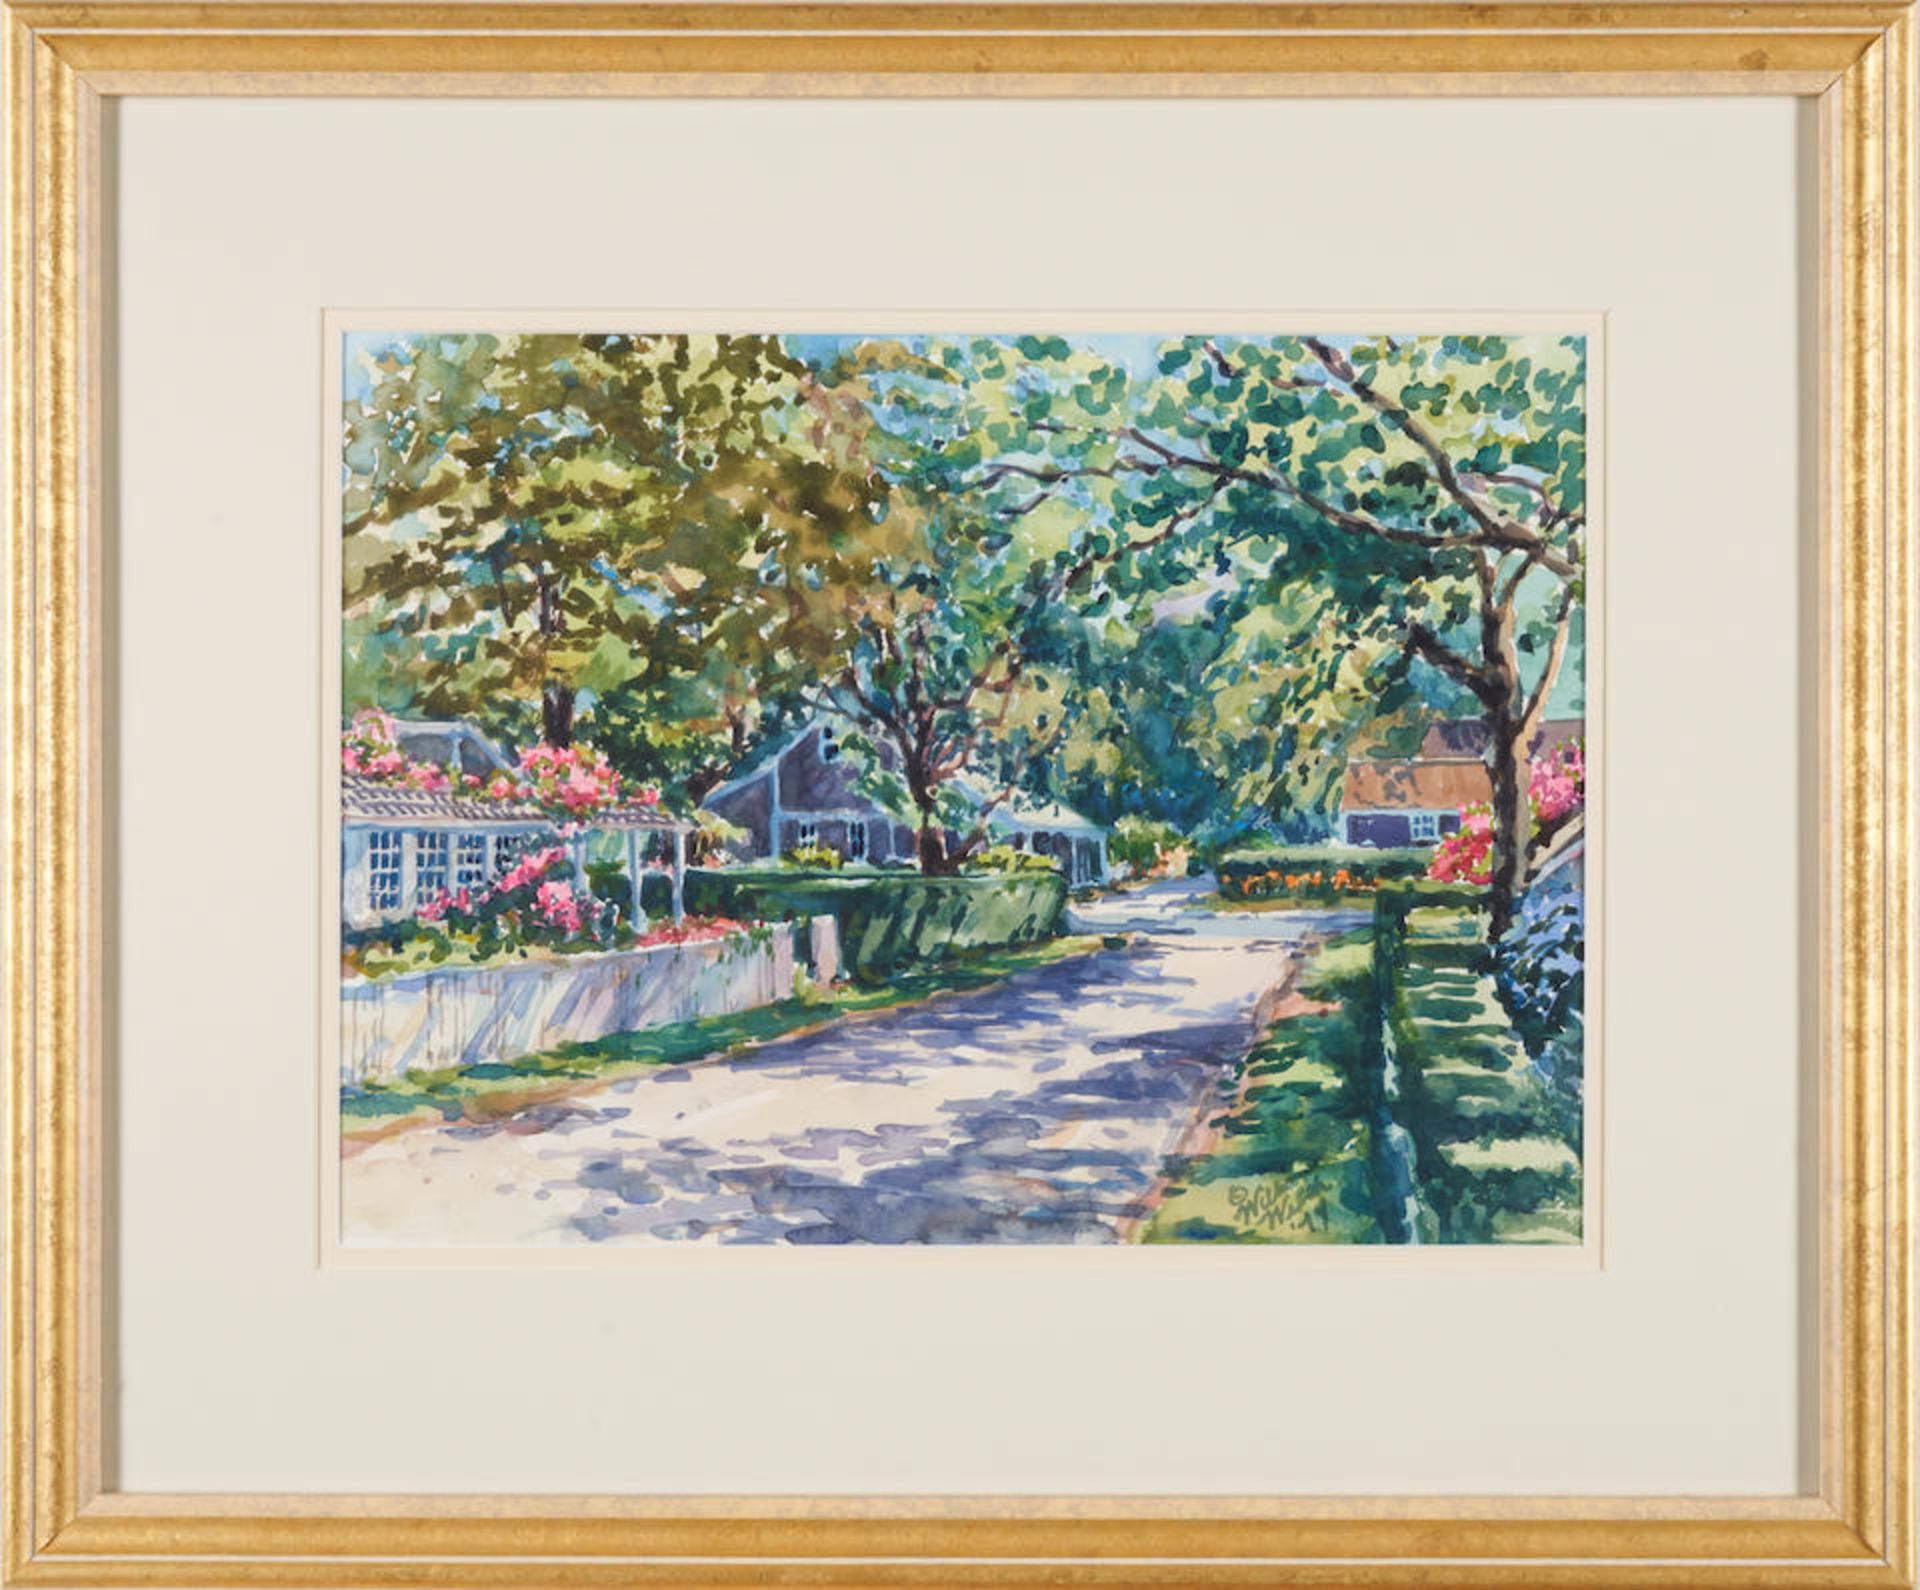 WILLIAM WELCH (AMERICAN, 20TH CENTURY) EVELYN STREET IN BLOOM